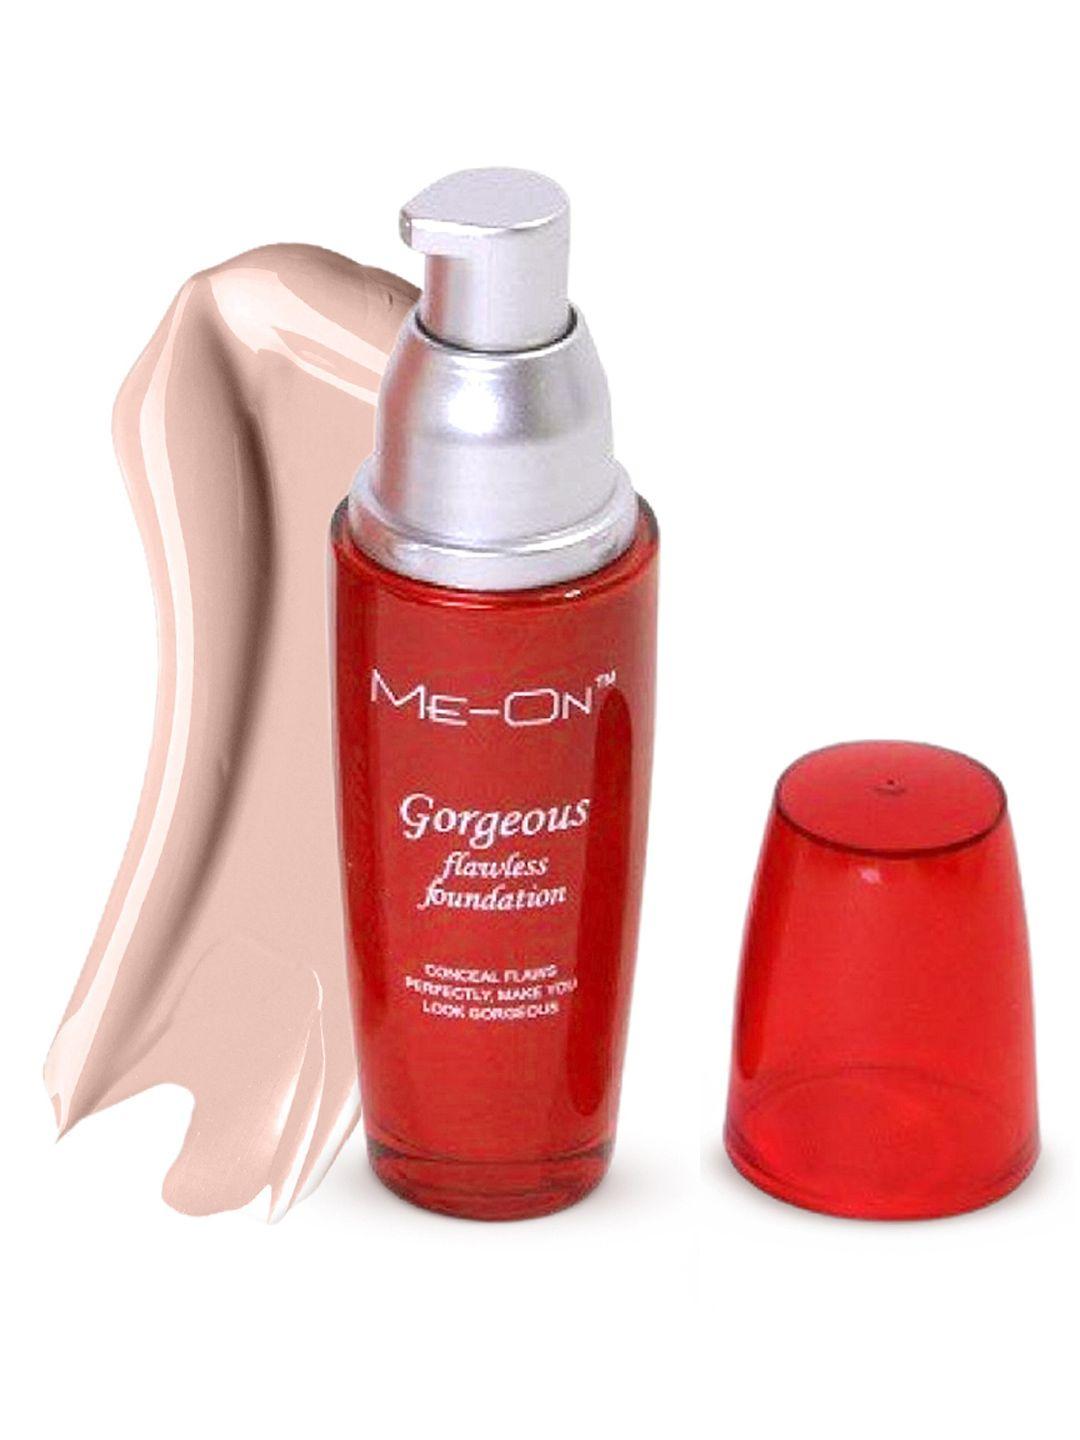 me-on gorgeous flawless foundation - marble 02